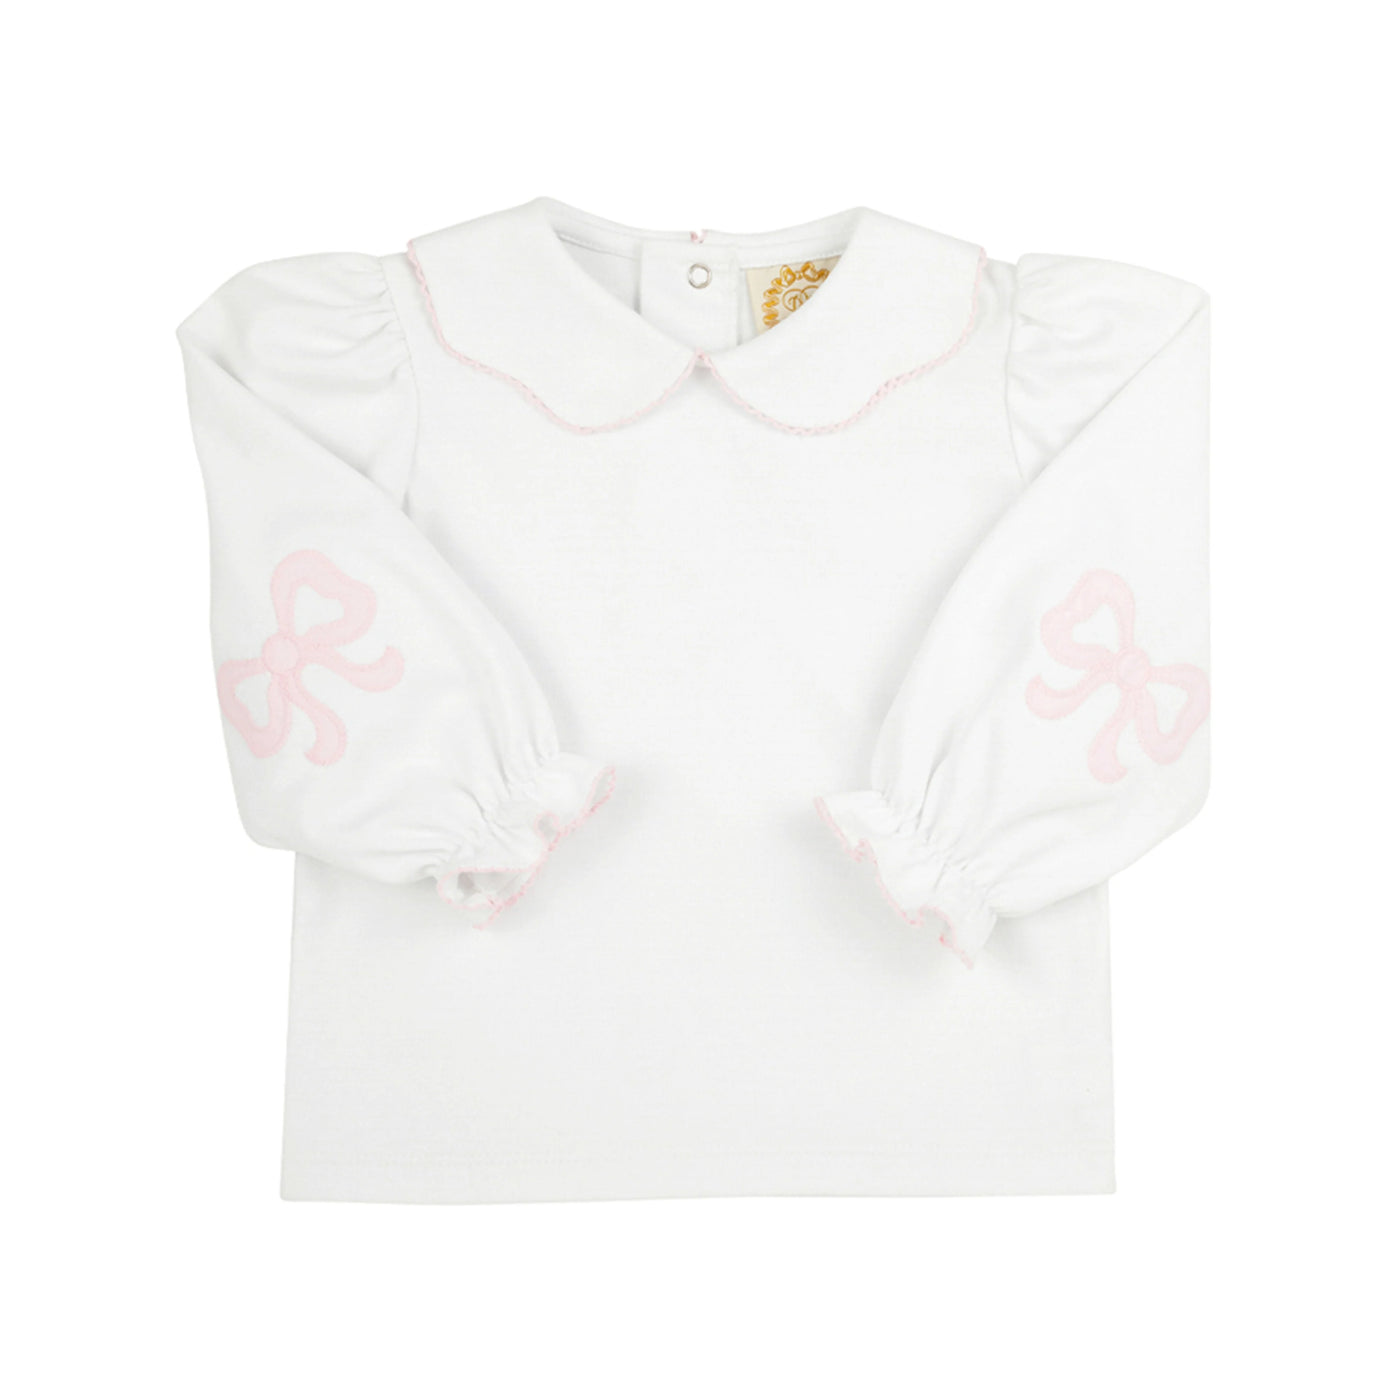 Emma's Elbow Patch Top & Onesie - Worth Avenue White with Palm Beach Pink